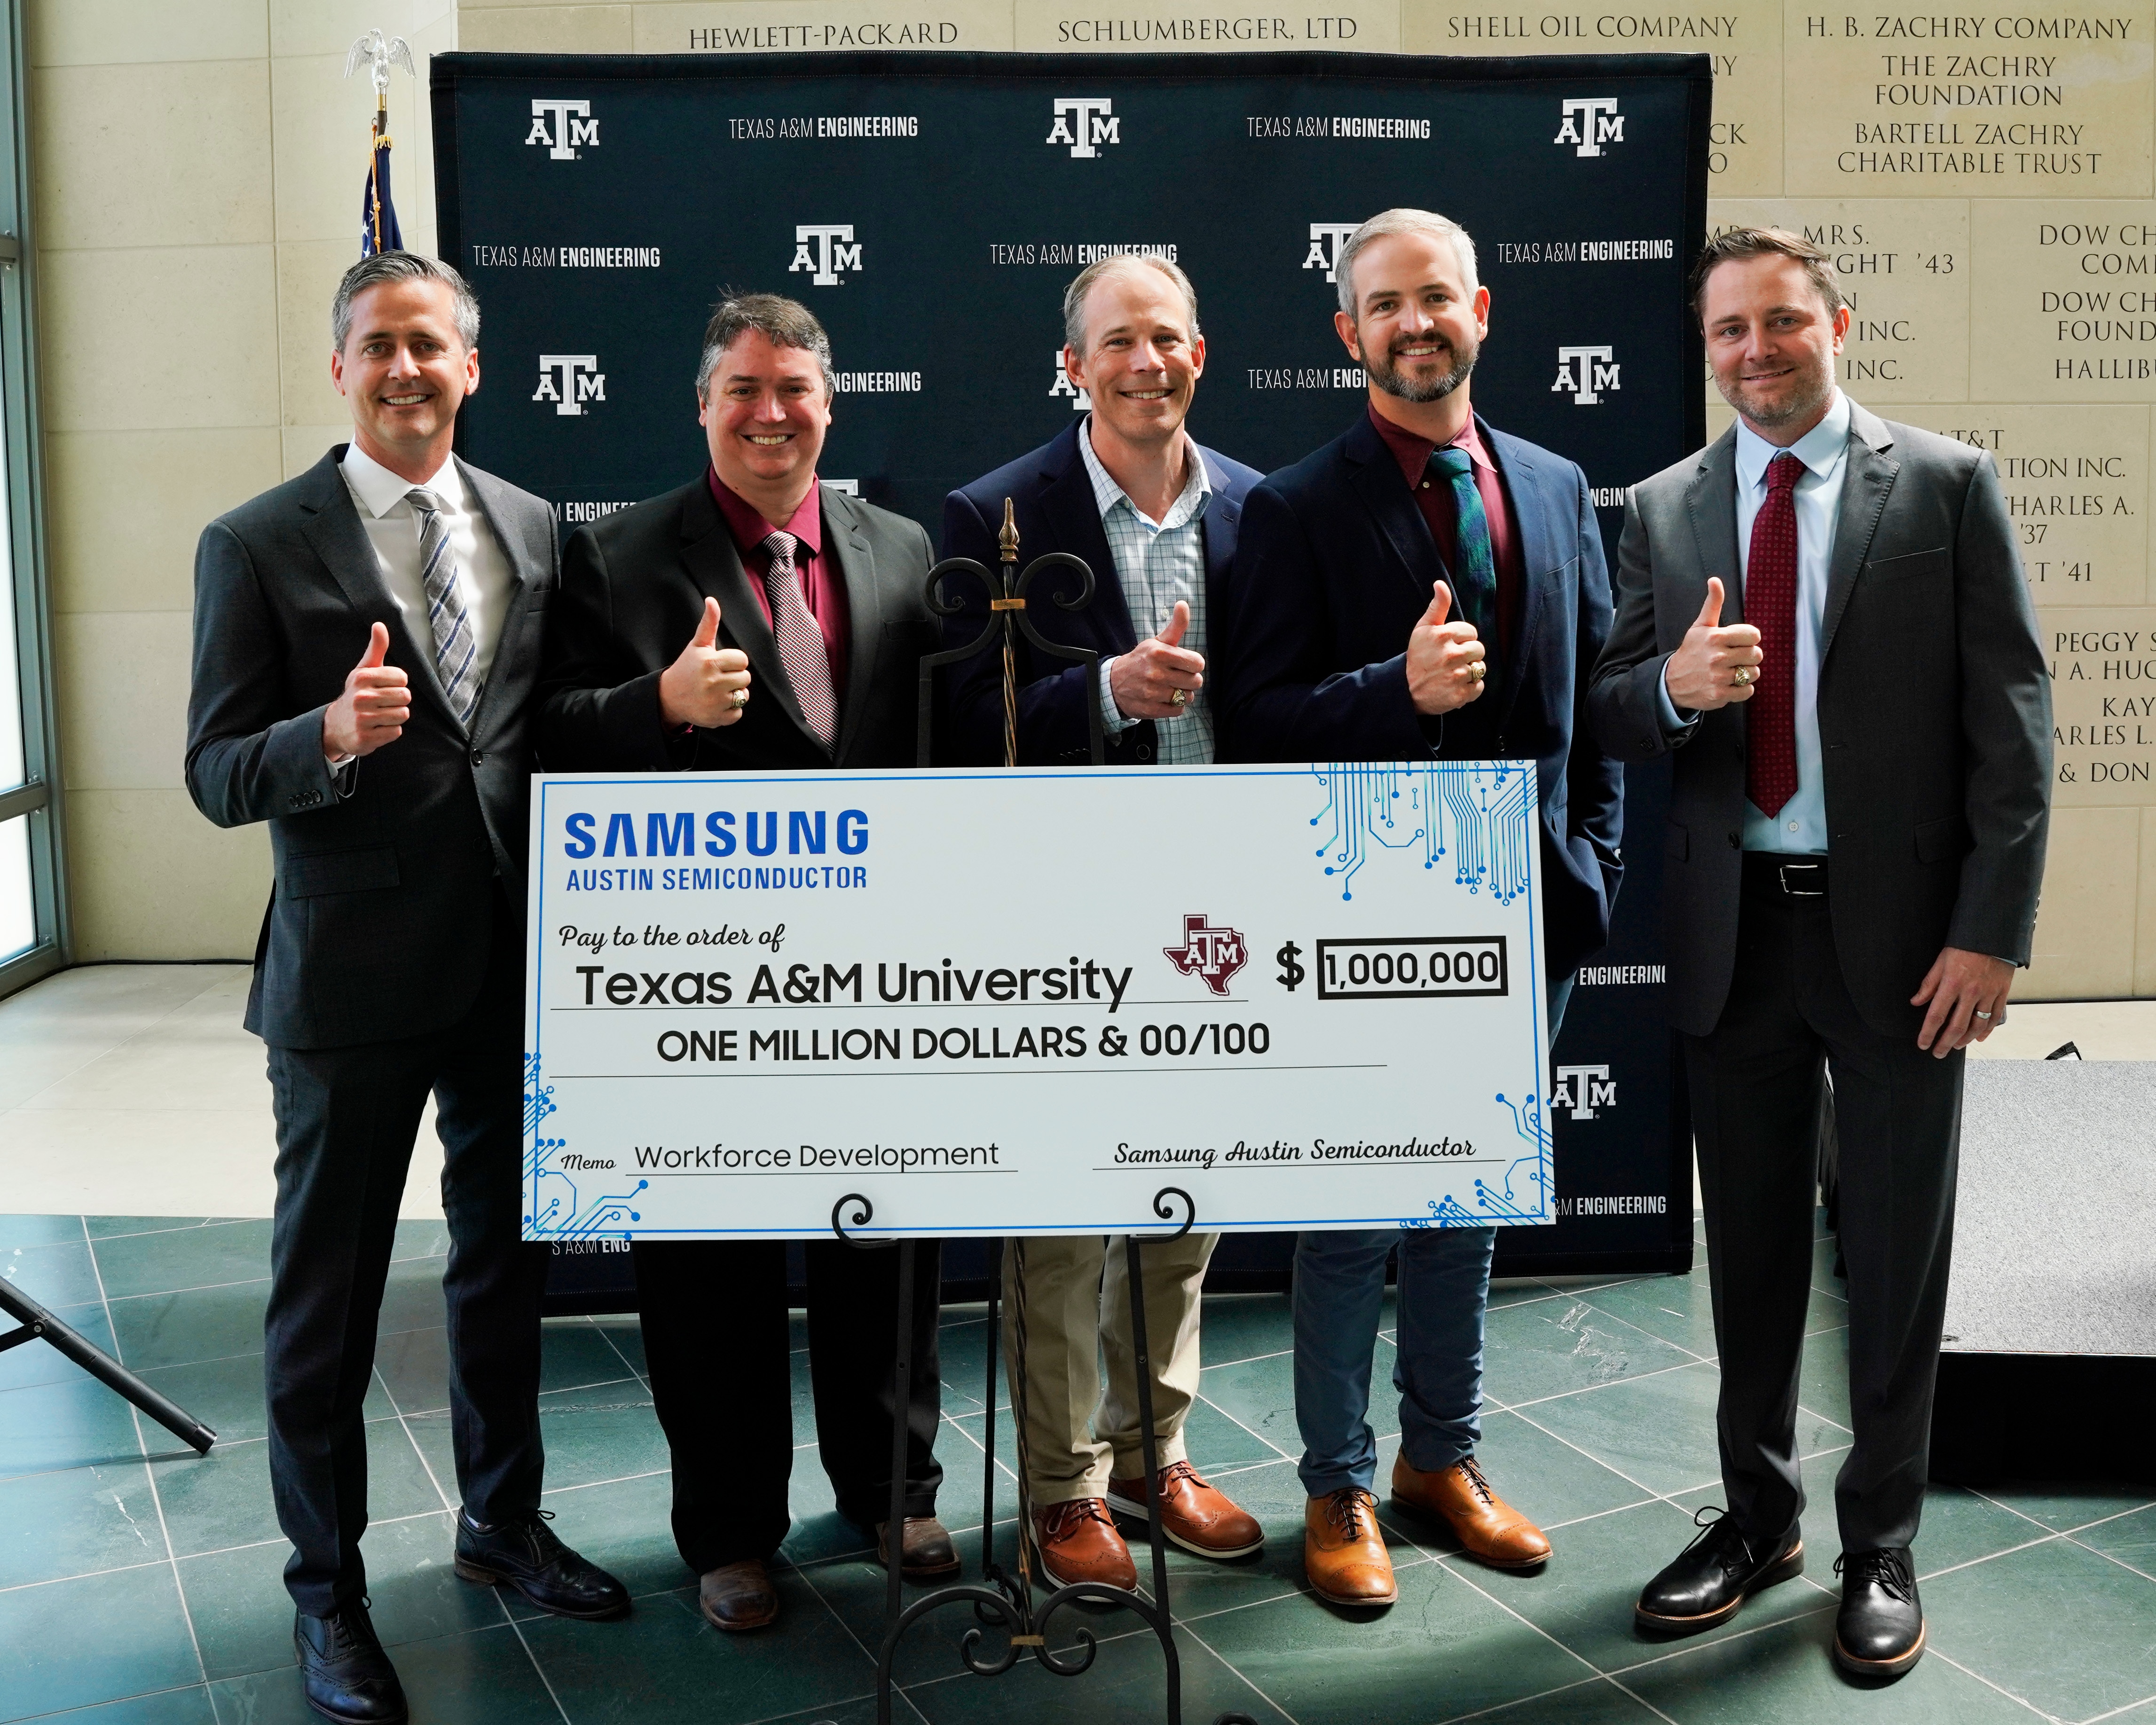 Five individuals who are Samsung Austin Semiconductor employees graduated from Texas A&M University posing with a ceremonial check 